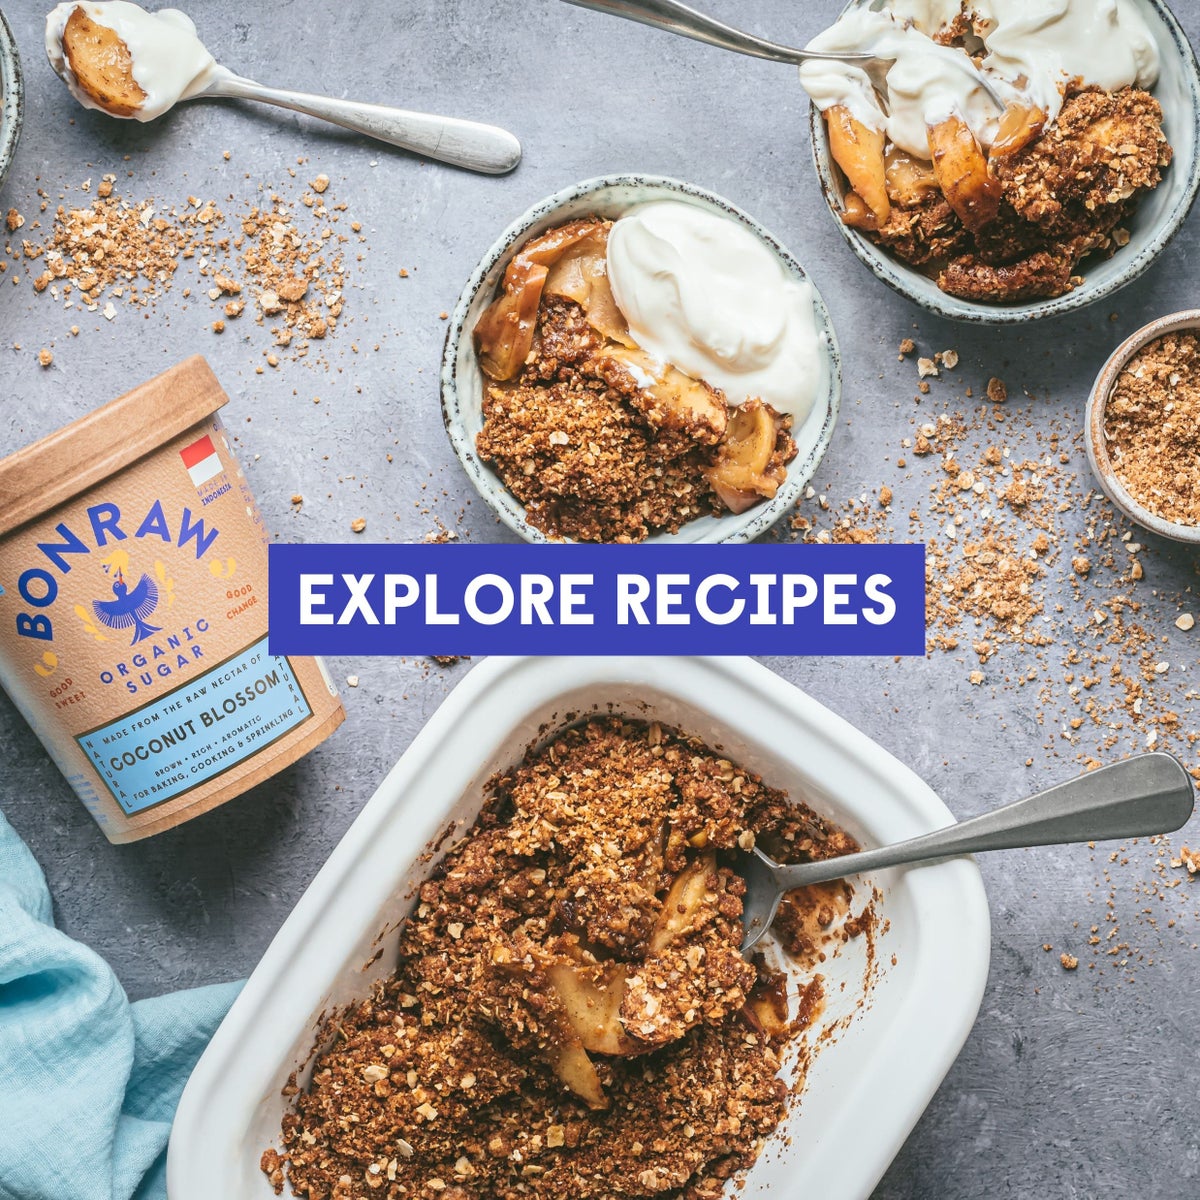 Who said apple crumble was for colder months? We've dived in perfected this simple and healthy dessert, perfect for summer evenings. Serve with non-dairy yoghurt for a refreshing packed bite. Explore recipes.